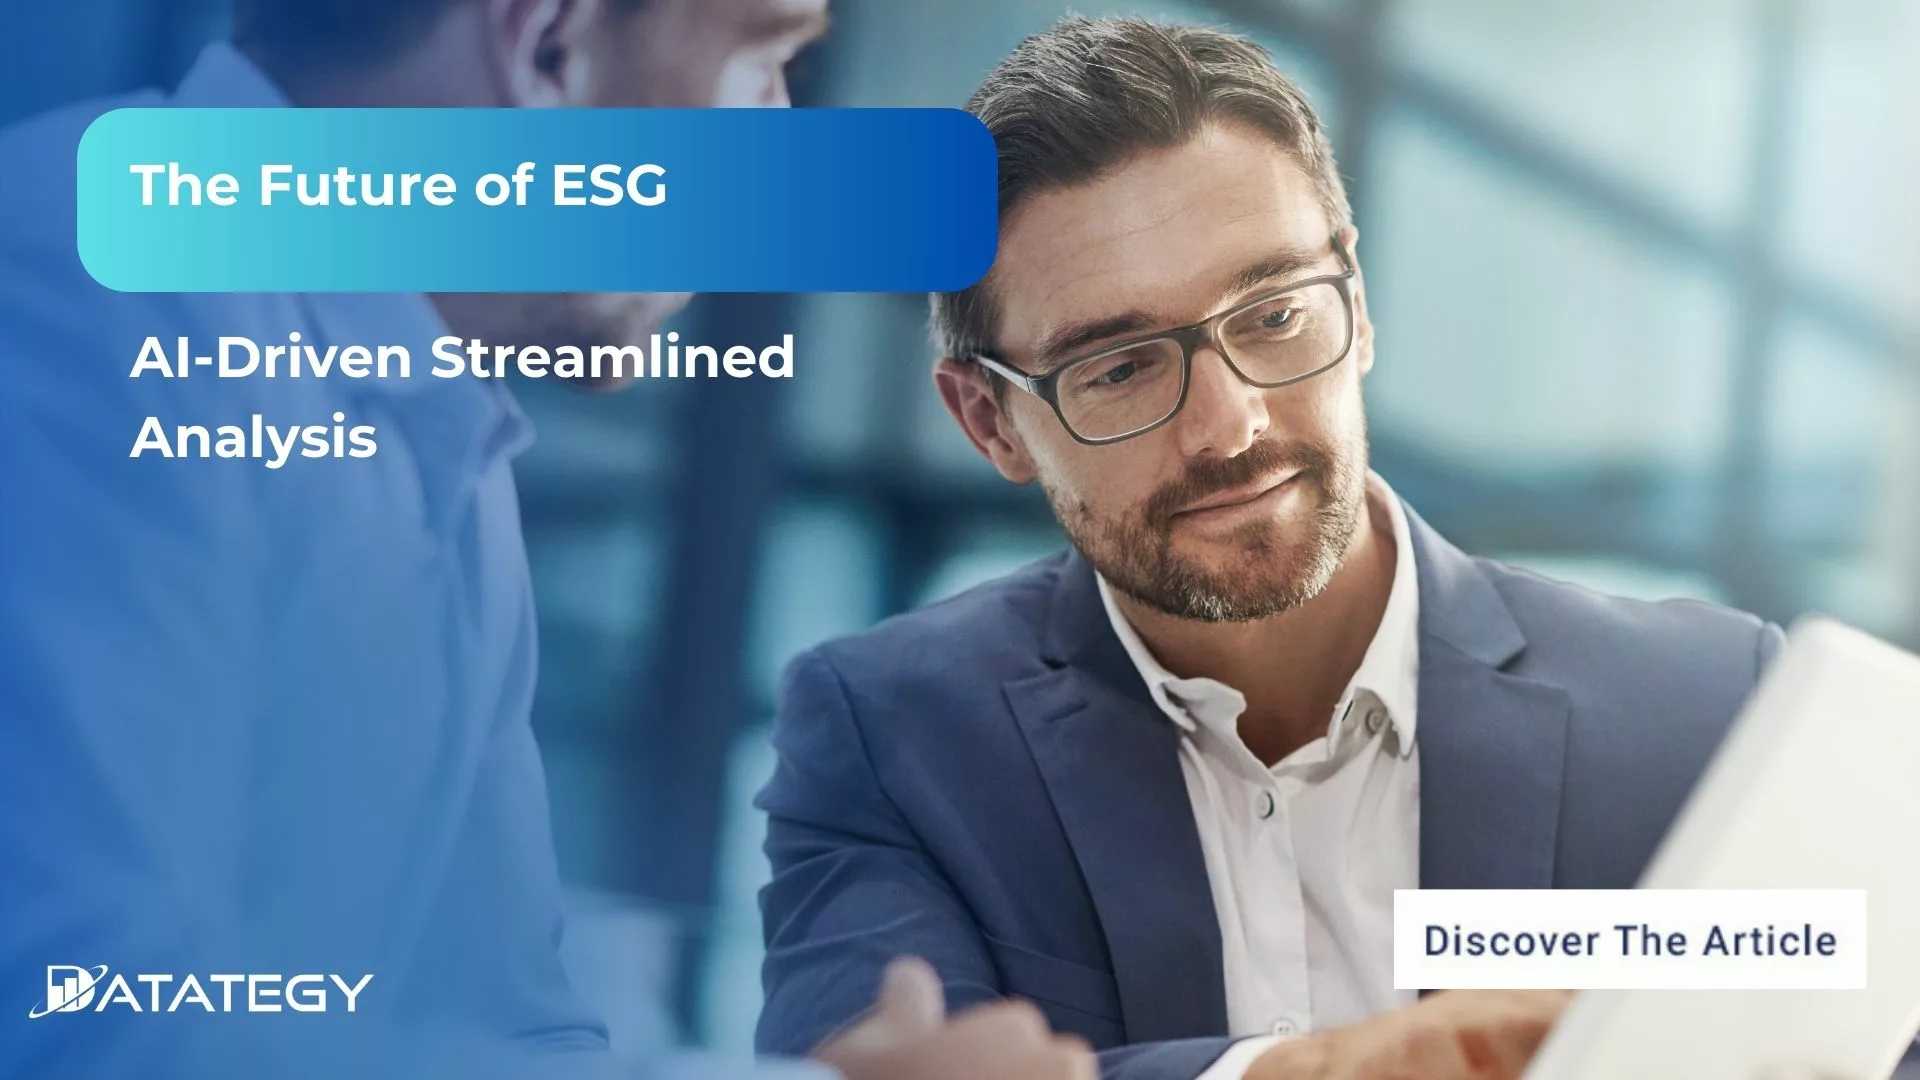 The Future of ESG: AI-Driven Streamlined Analysis